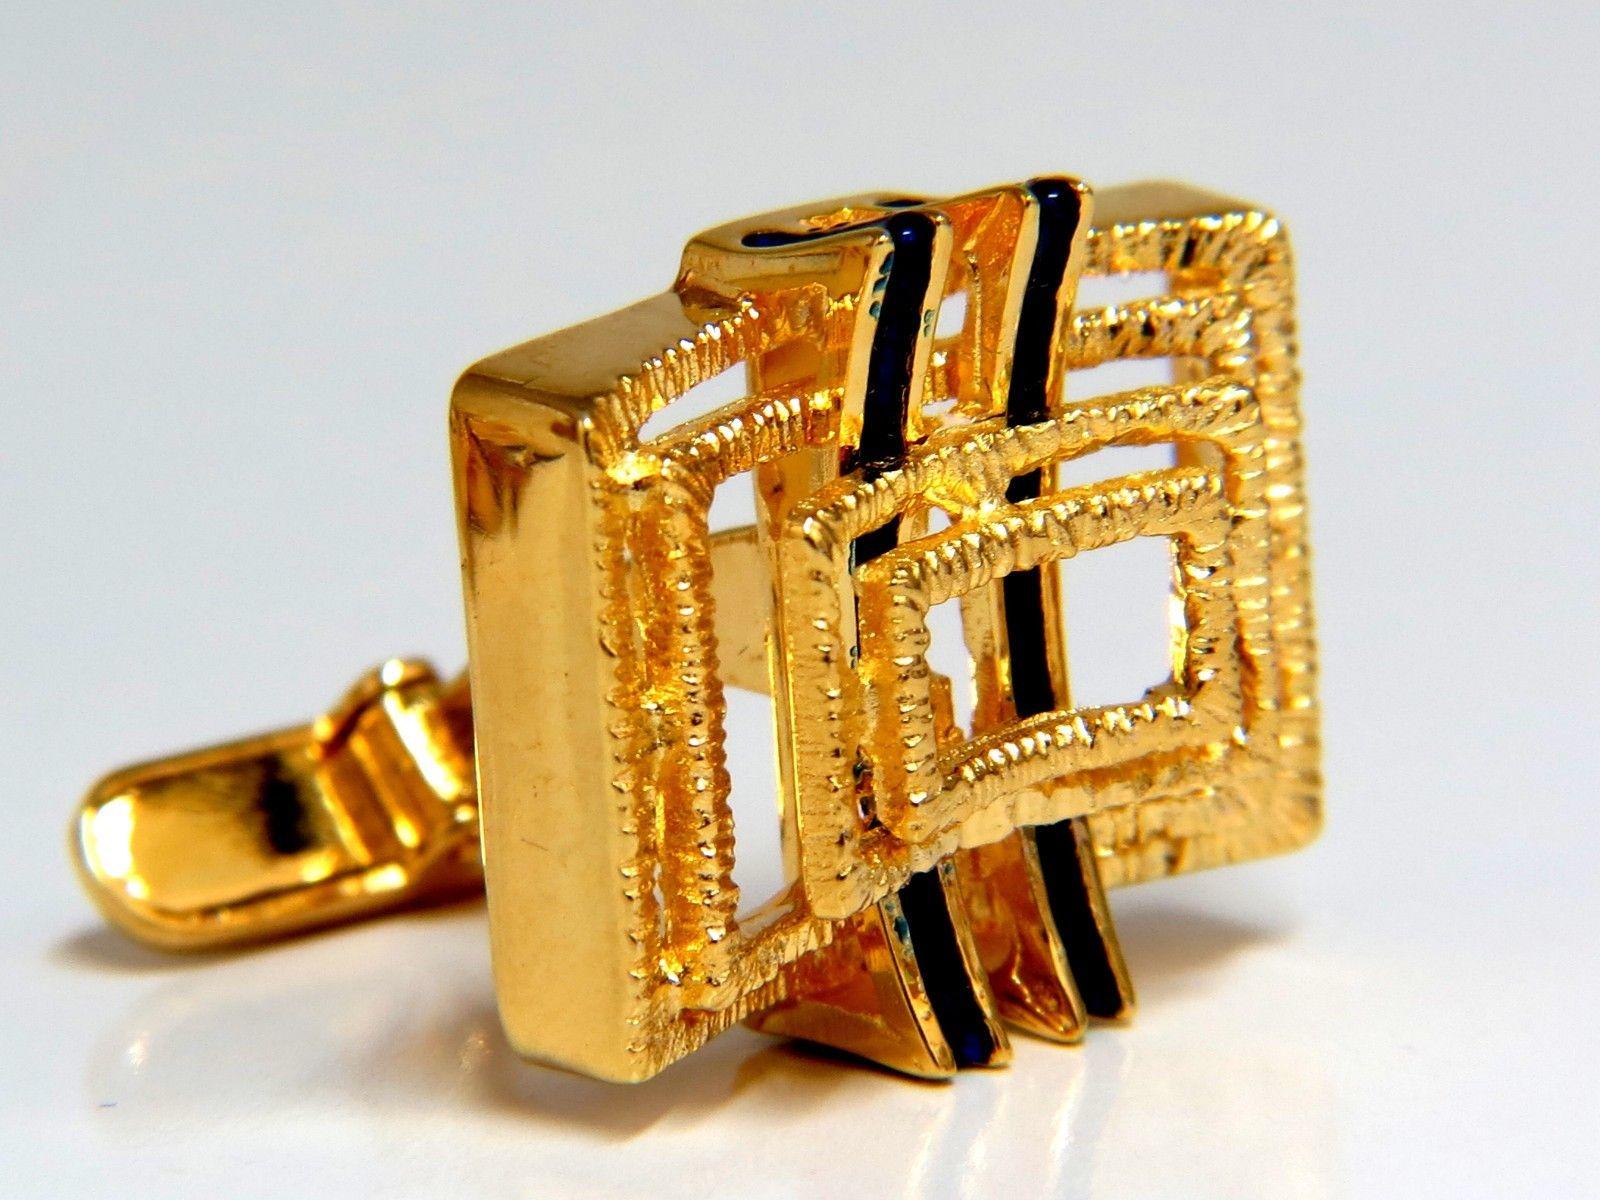 Amazing detail 

Open Concave Mod Deco Cufflinks

Gorgeous detail.

19 grams.

18kt. yellow gold

Top diameter: 21 x 23mm

Solid, perfect for daily wear.